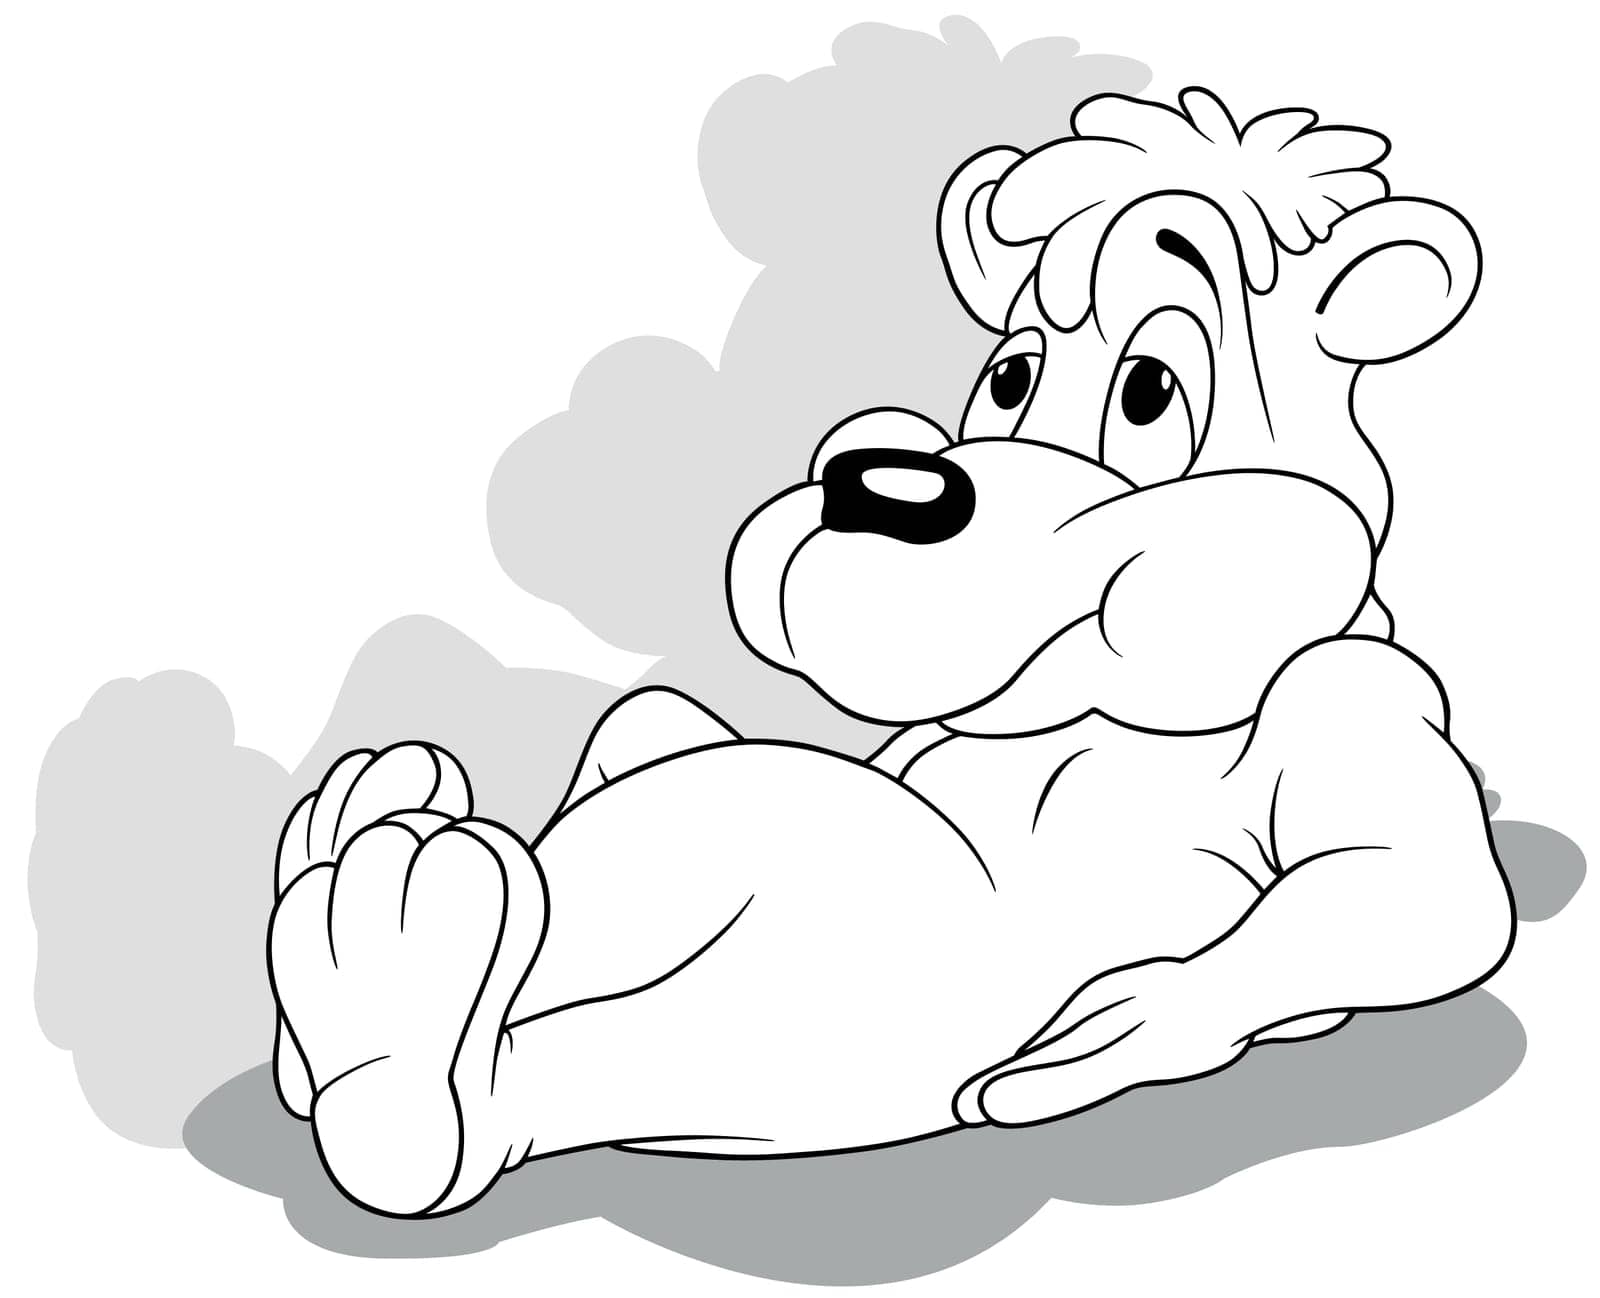 Drawing of a Resting Teddy Bear Leaning on his Elbows - Cartoon Illustration Isolated on White Background, Vector